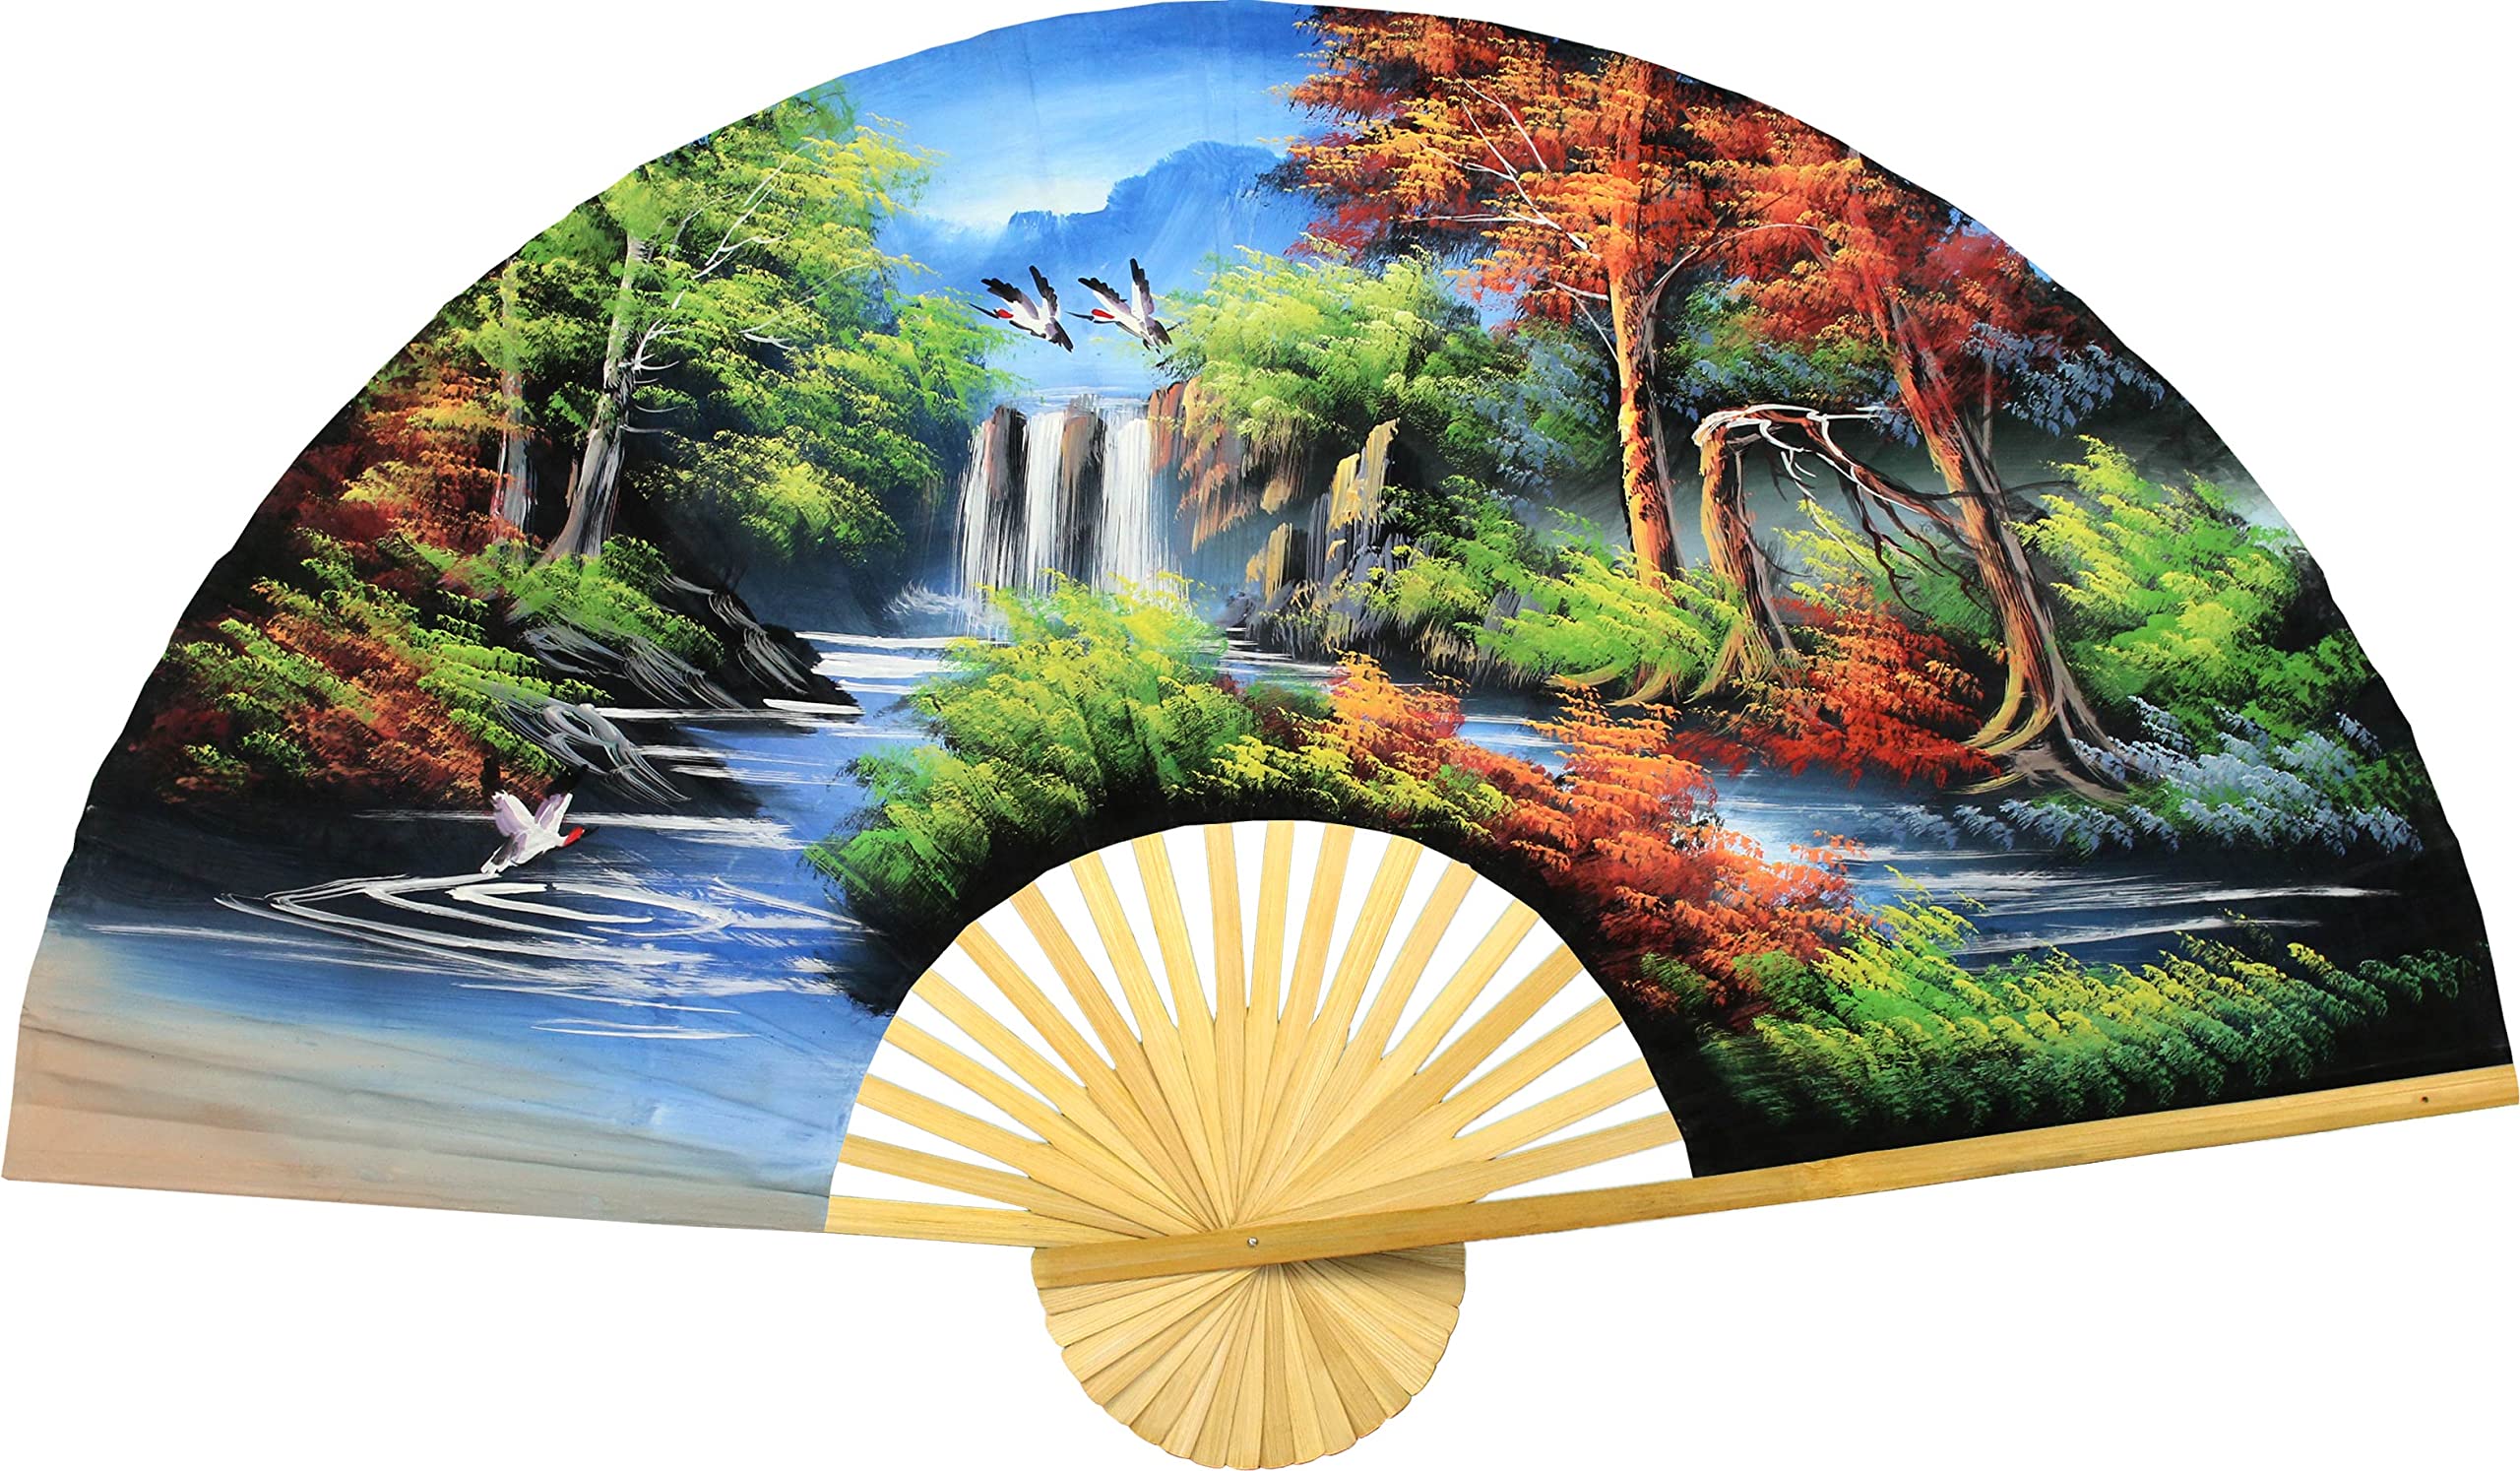 Forest Landscape Giant Folding Wall Fan Hand-painted Decorative Wall Decor Art, Handmade Nature Themed Original Acrylic Painting on a Natural Bambo...